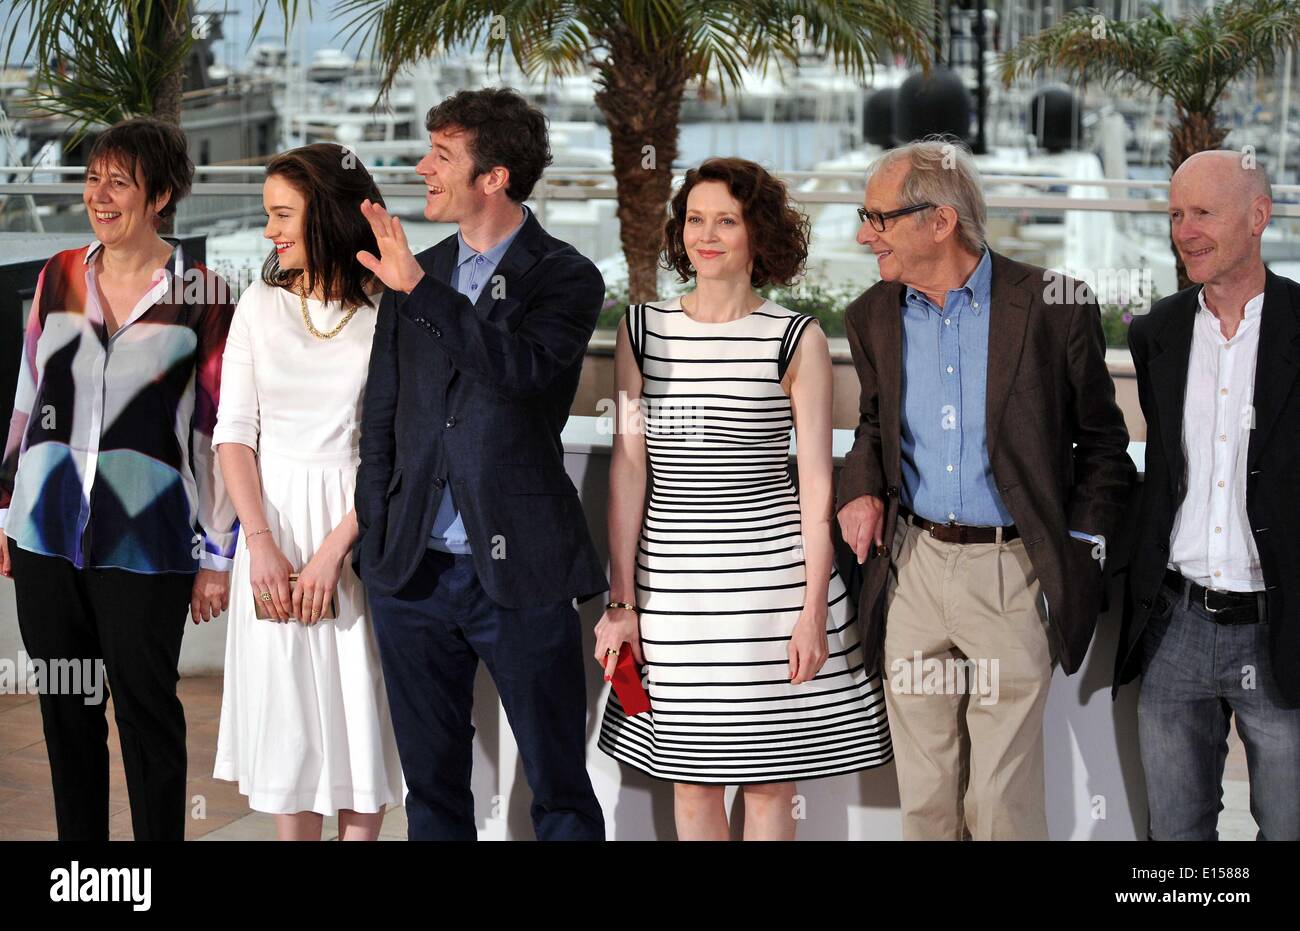 Cannes, Cannes of France. 22nd May, 2014. (From L to R) Producer Rebecca O'Brien, actress Aisling Francios, actor Barry Ward, actress Simone Kirby, director Ken Loach and writer Paul Laverty pose for photos for the screening of 'Jimmy's Hall' during the 67th Cannes Film Festival, in Cannes of France, May 22, 2014. The movie is presented in the Official Competition of the festival which runs from 14 to 25 May. Credit:  Chen Xiaowei/Xinhua/Alamy Live News Stock Photo